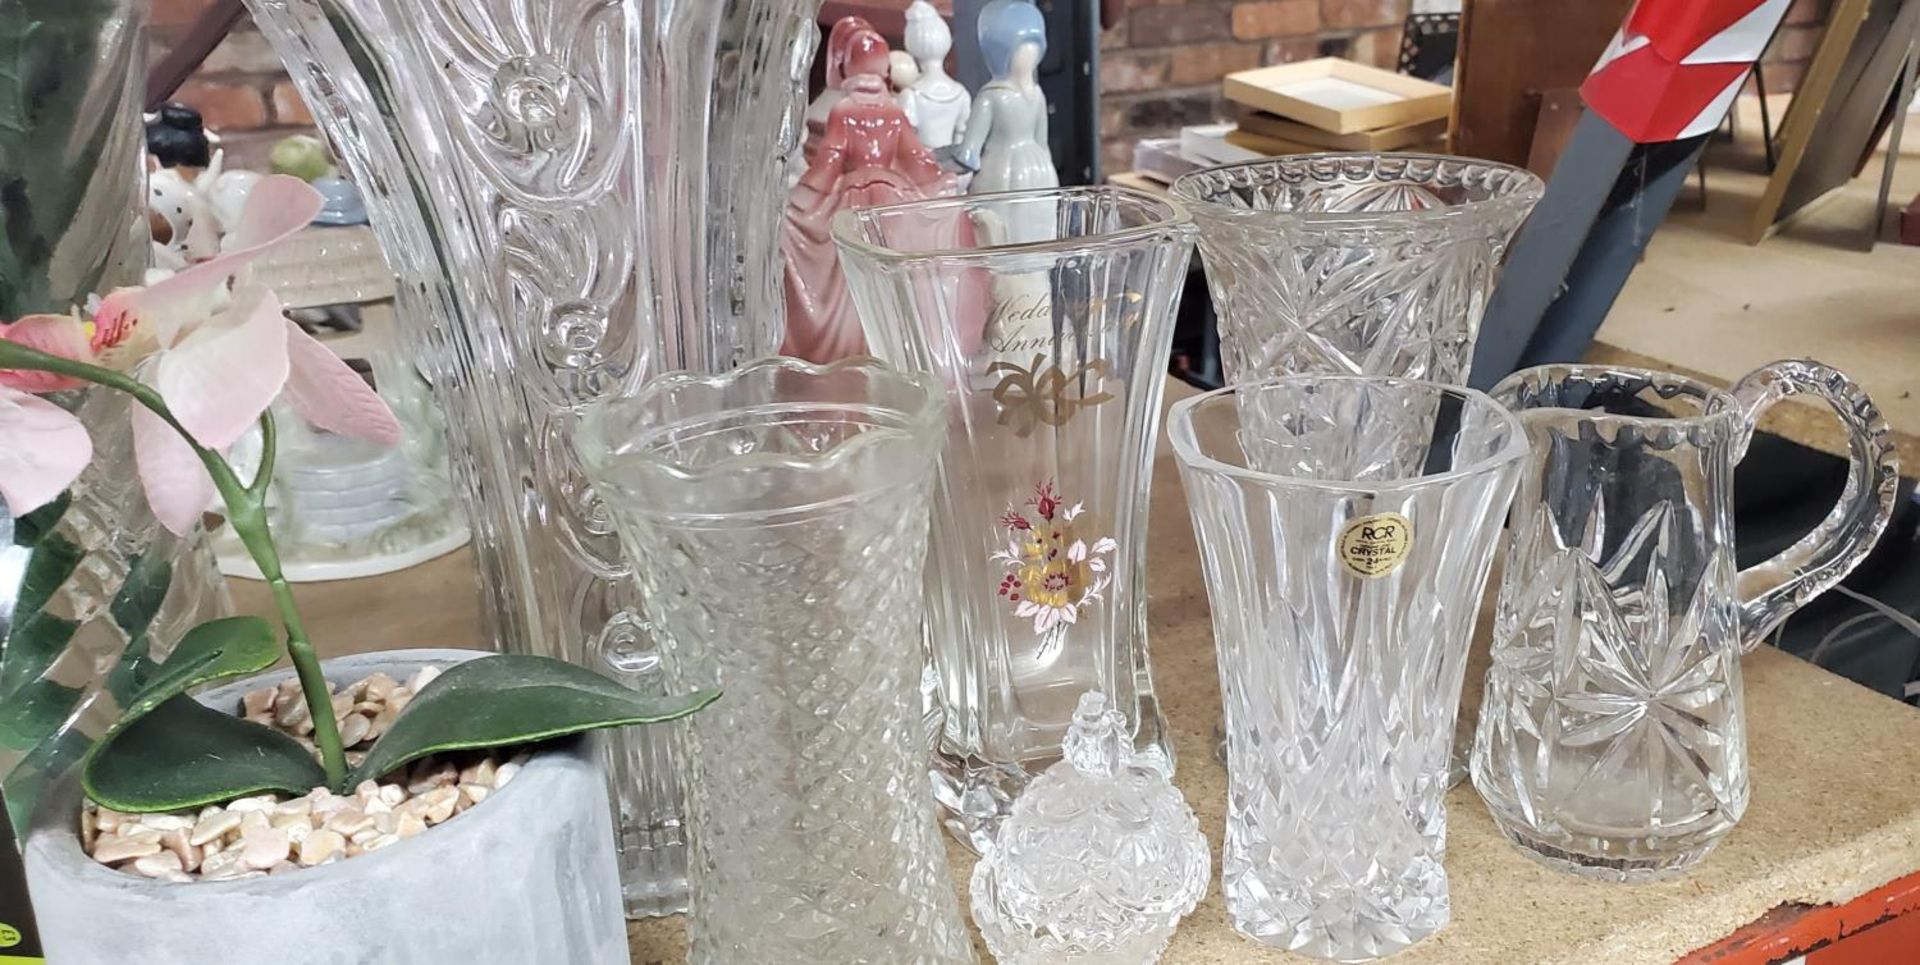 A QUANTITY OF GLASSWARE TO INCLUDE VASES, JUGS, BOWLS, A CAKE STAND, ETC PLUS ARTIFICIAL FLOWERS - Bild 2 aus 3